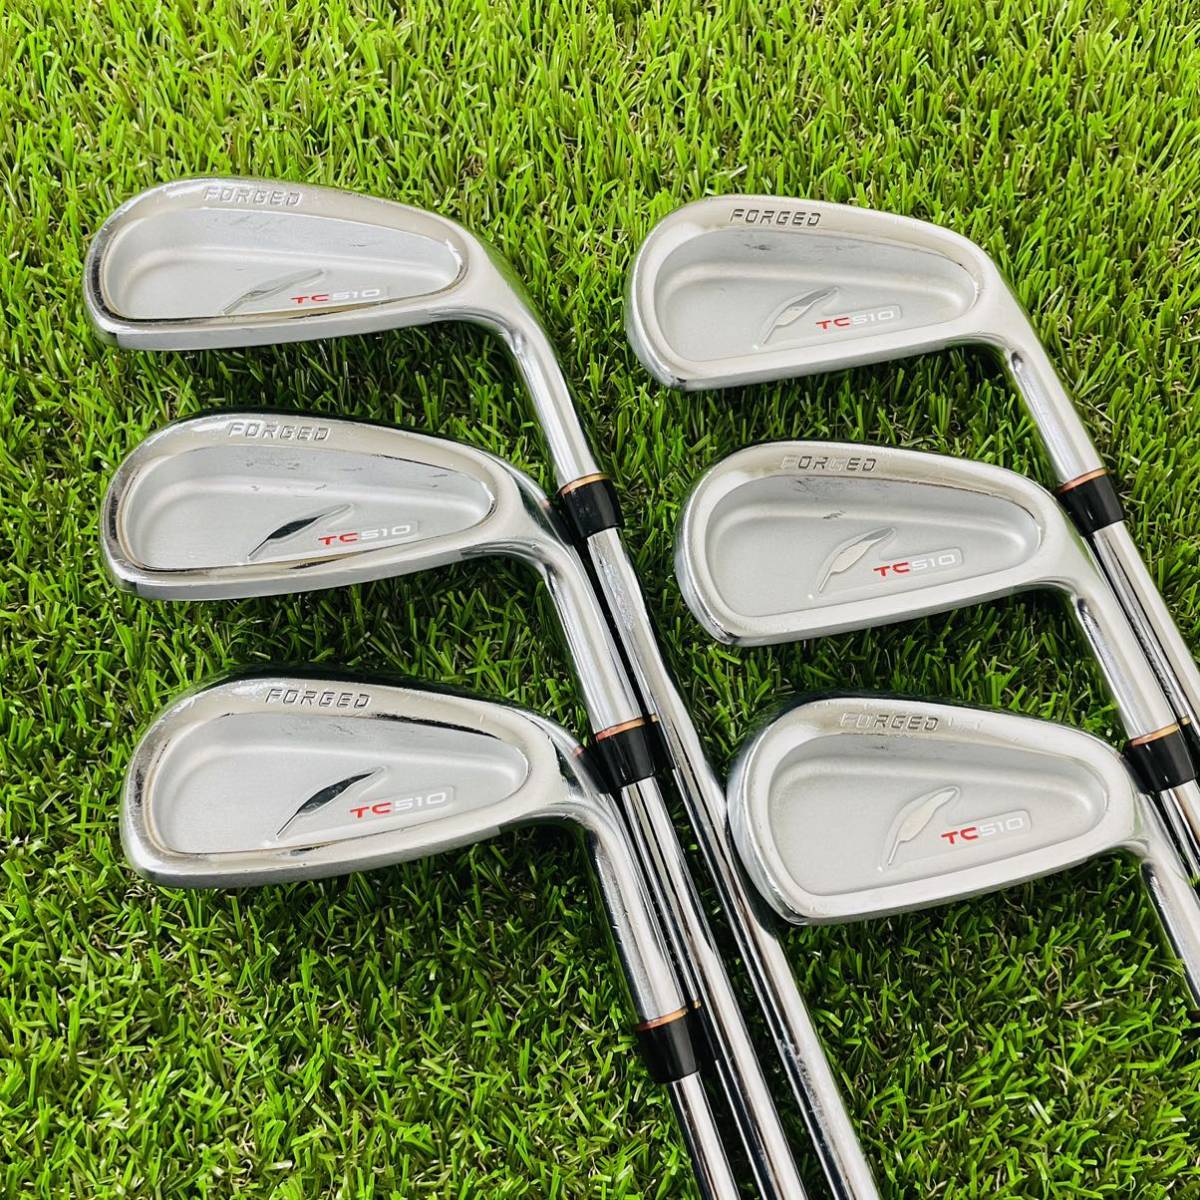 FOURTEEN フォーティーン TC510 FORGED アイアンセット N.S. PRO 950GH （S） 男性用 右利き